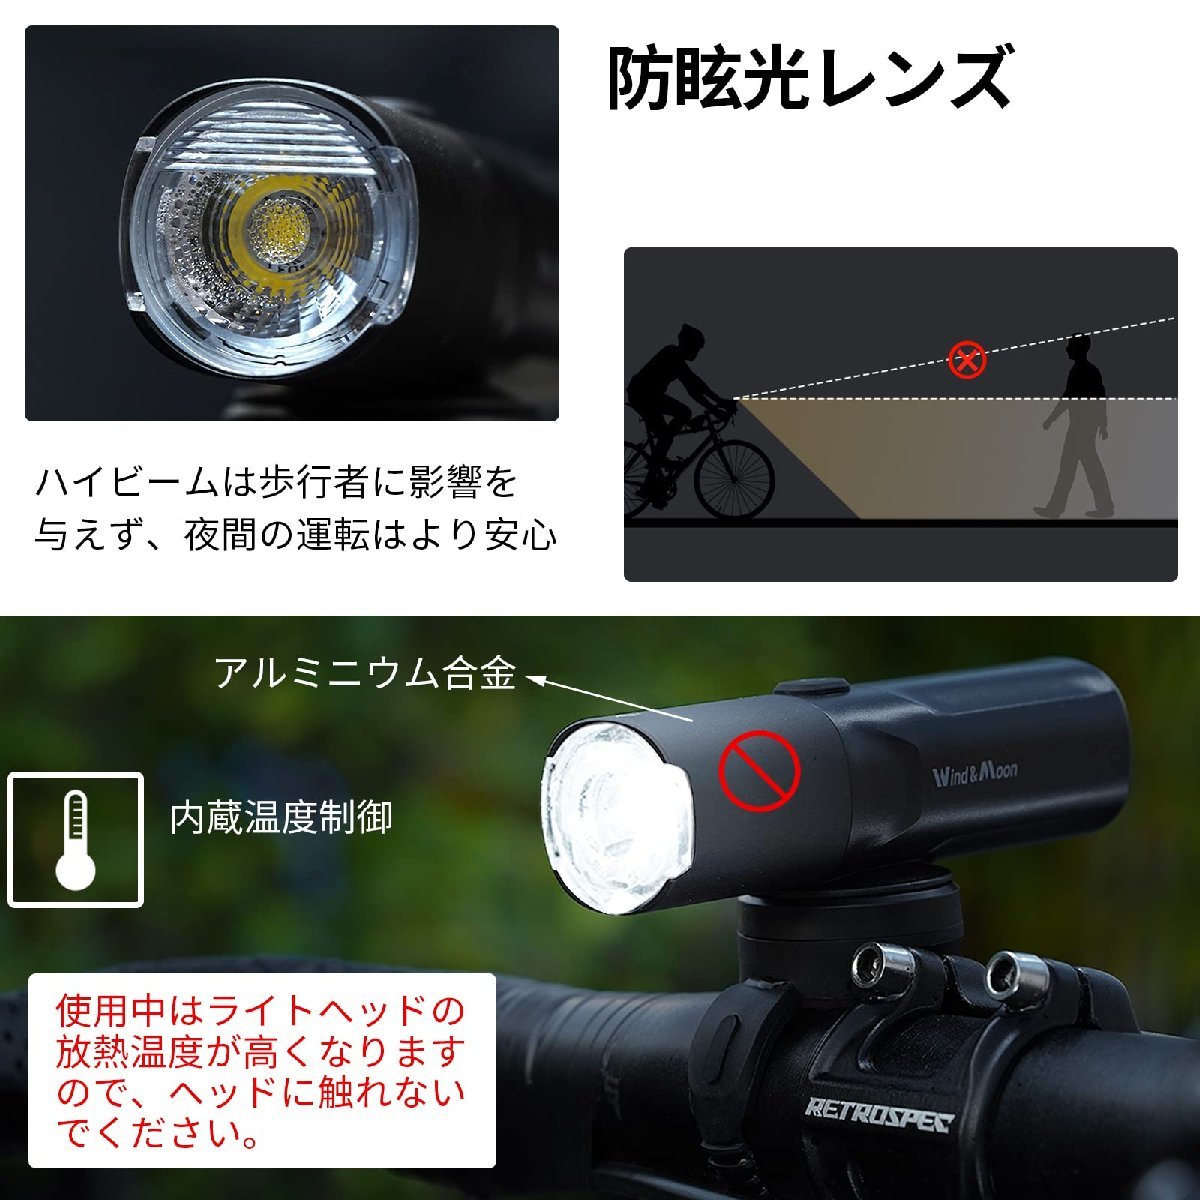  free shipping * bicycle for light USB rechargeable 600 lumen 2200mAh high capacity LED IP66 waterproof vibration control Type-C charge port 